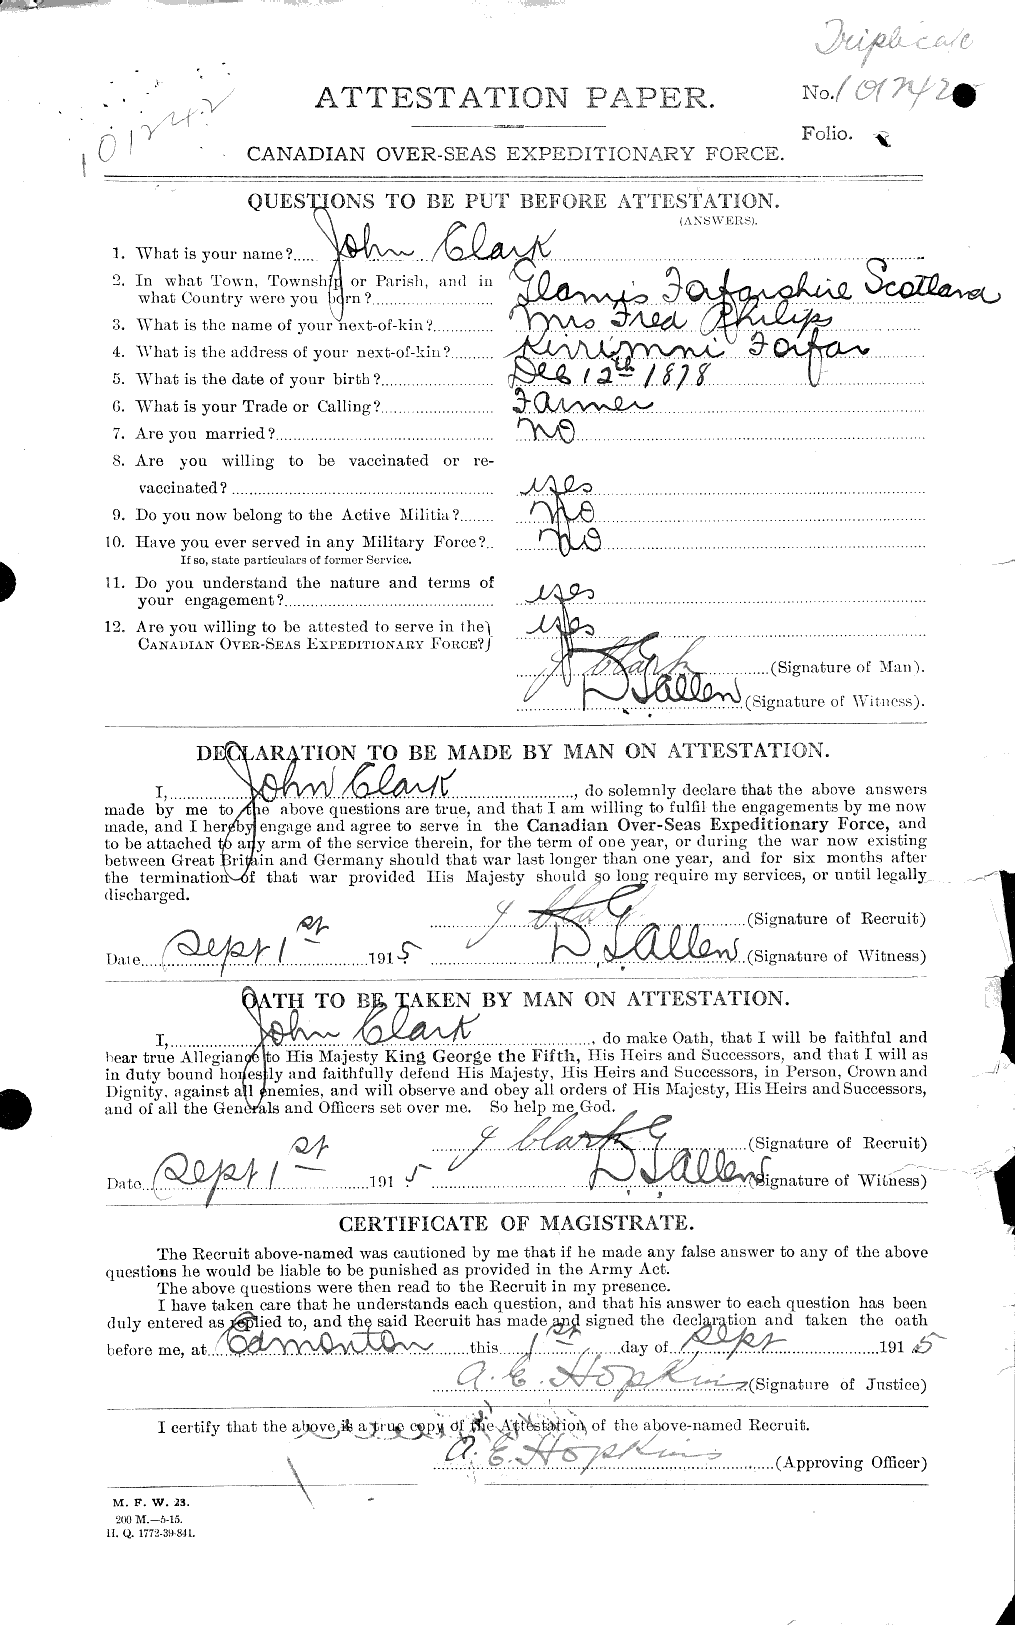 Personnel Records of the First World War - CEF 023369a